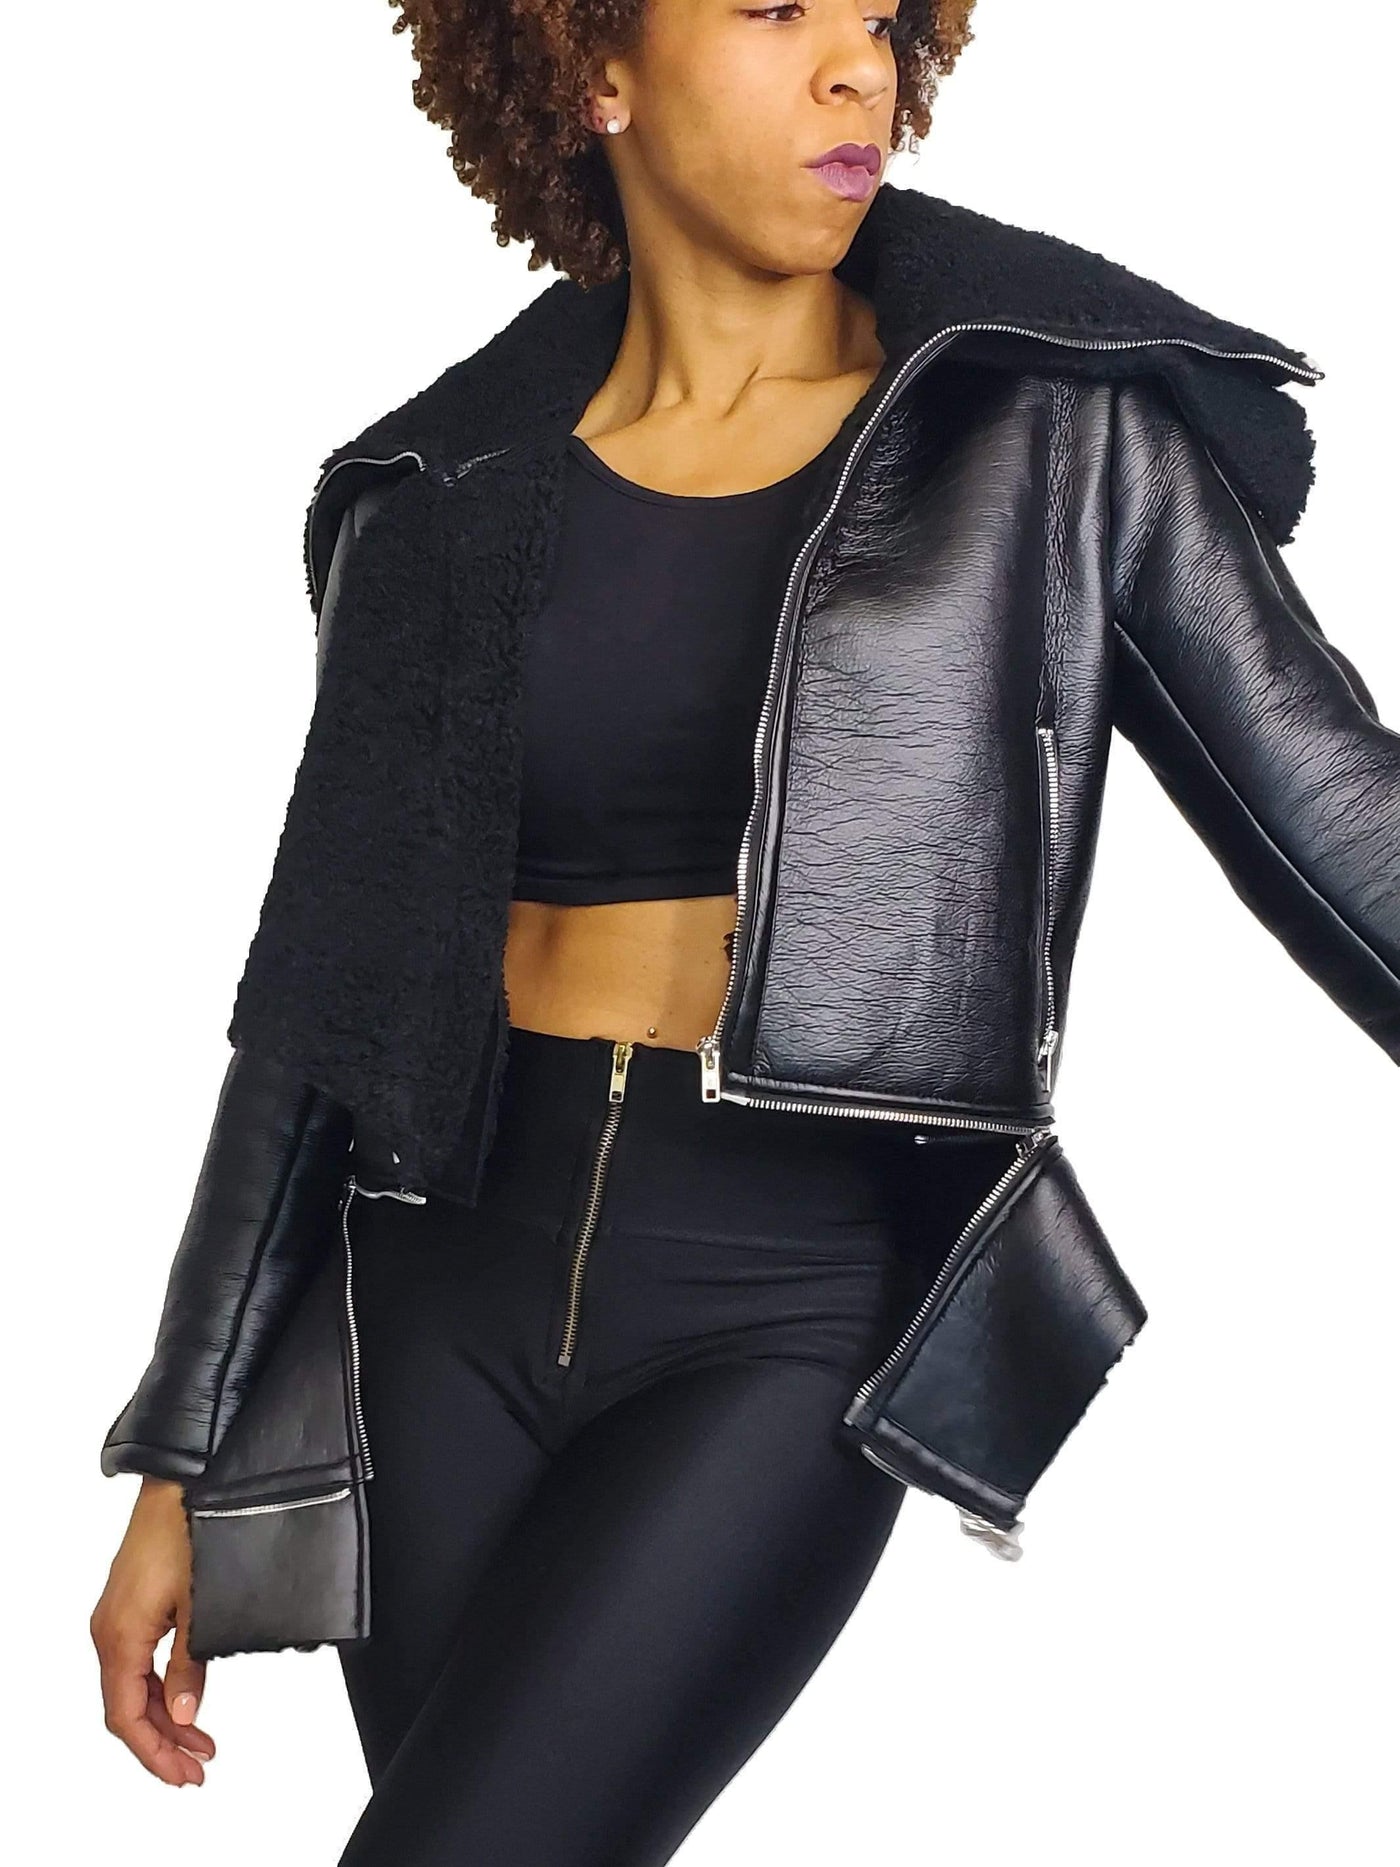 The Aviator | Sherpa Lined Leather Coat - Statement Piece NY _tab_size-chart, Black, Brooklyn Boutique, chic, coat, exclusive, Fall, Fall Fashion, jacket, jackets, Leather, Long Sleeve, Misses, Monochrome, outerwear, popular, Sherpa, Standard Fall, Statement Clothing, Statement outerwear, statement piece, Statement Piece Boutique, statement piece ny, Statement Pieces, Statement Pieces Boutique, stylish coat, Women's Boutique Statement Outerwear